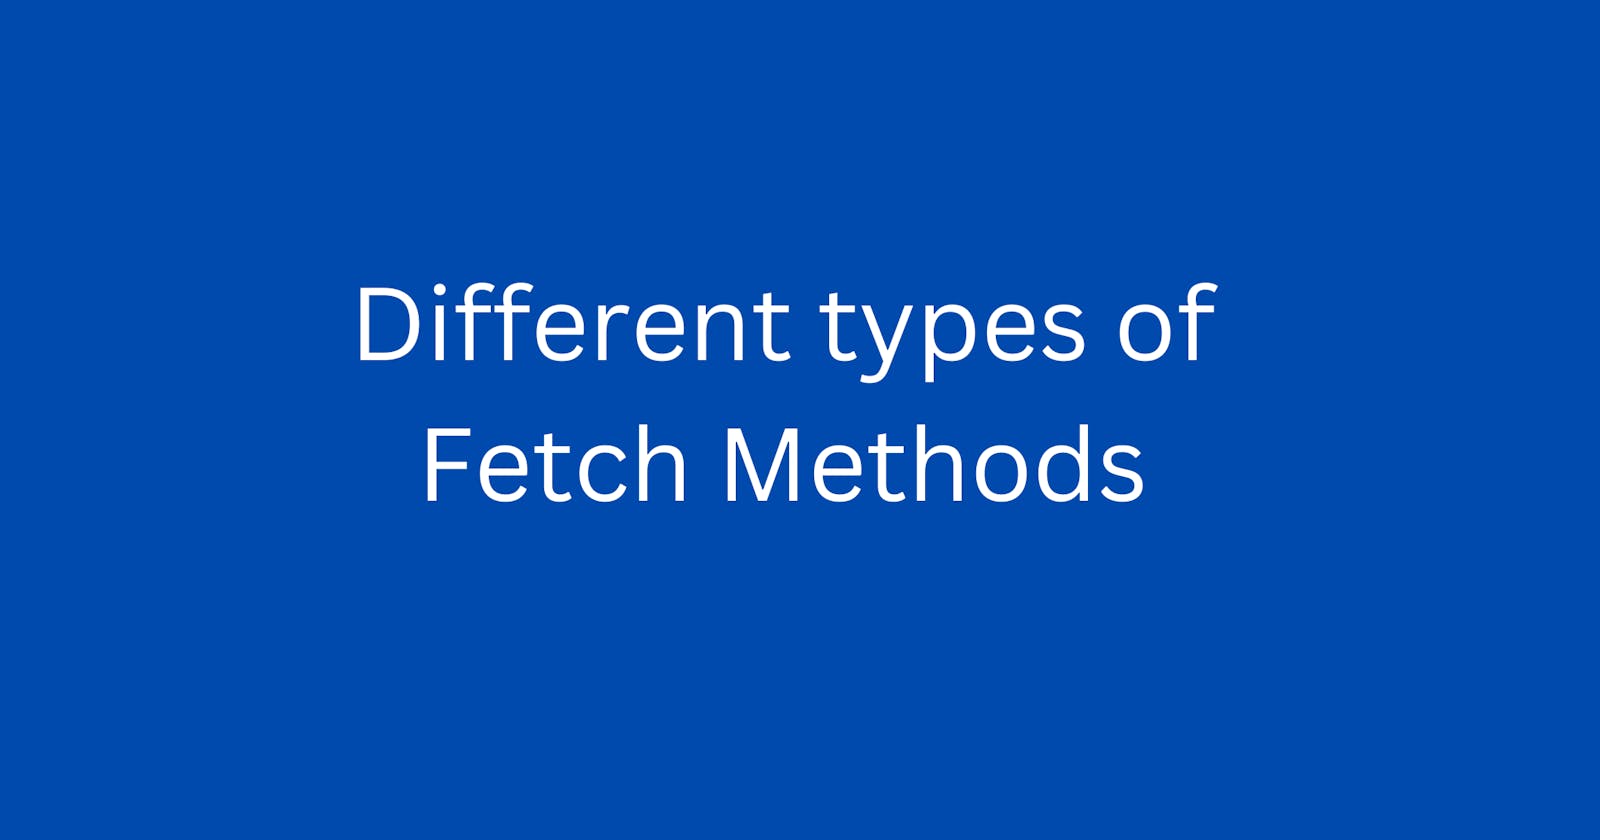 Different types of Fetch Methods